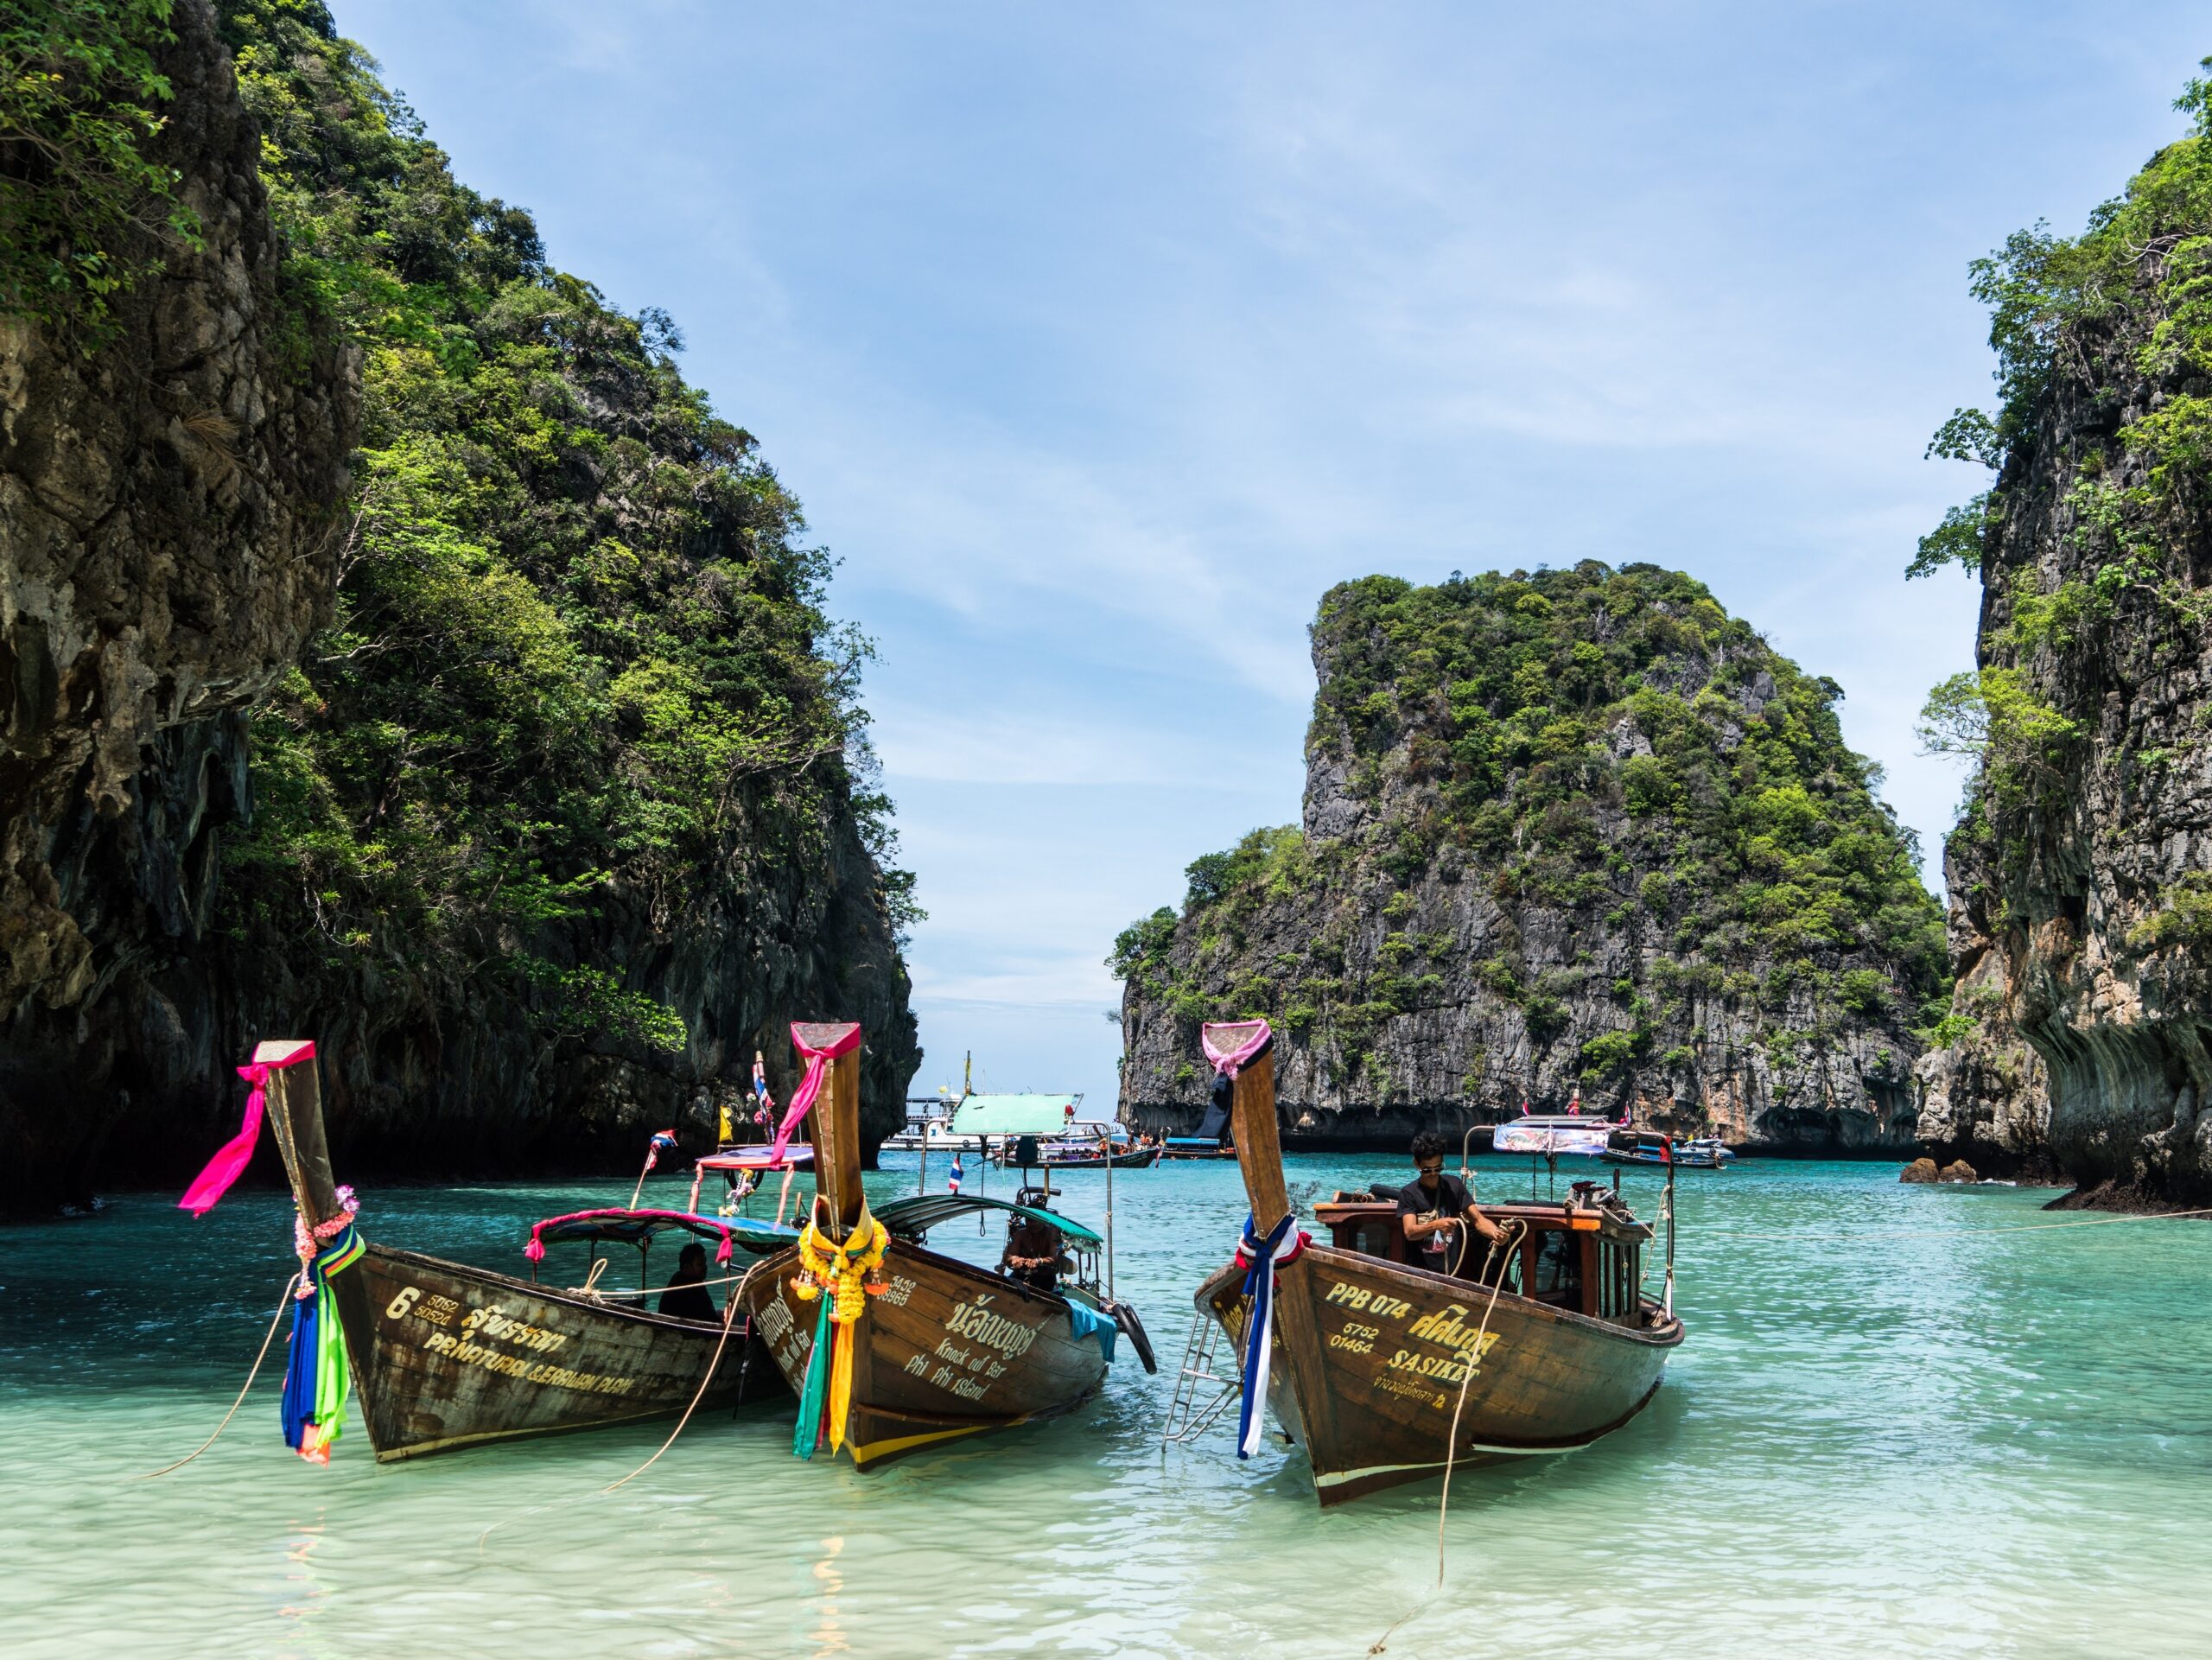 Thailand Travel Guide: A guide for first-timers to visit the Land of Smiles